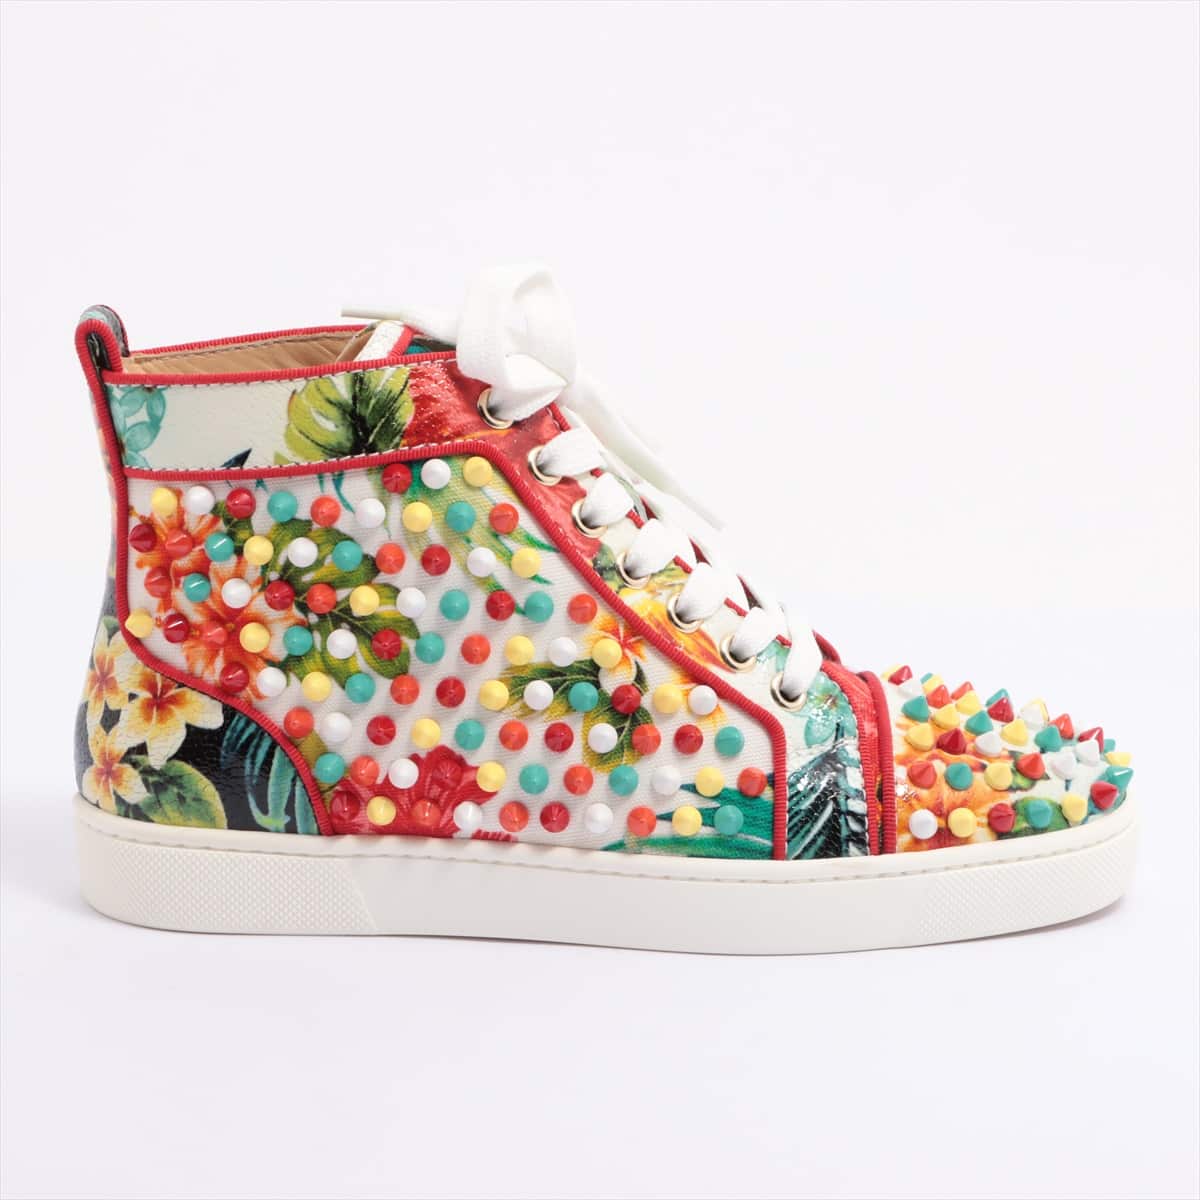 Christian Louboutin Lewis Spike Fabric Sneakers 35 Ladies' Multicolor LOUIS ORLATO Studs